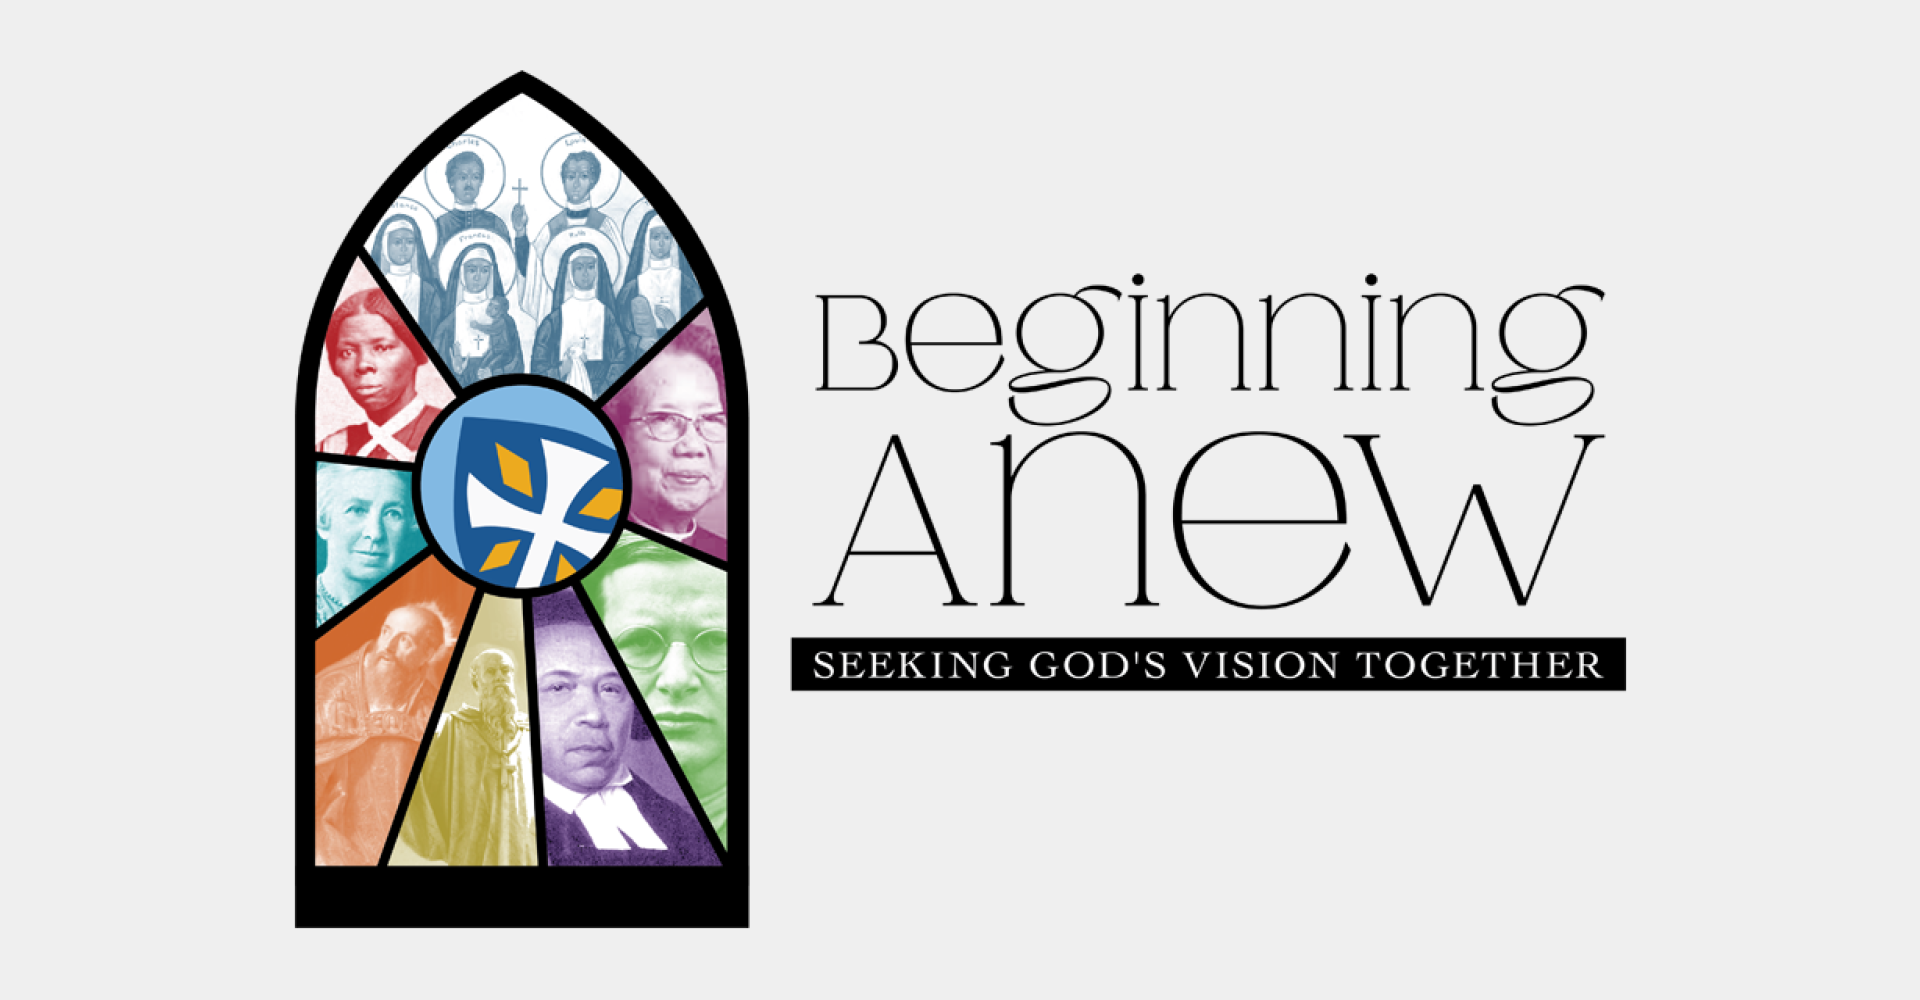 Beginning Anew: Seeking God's Vision Together